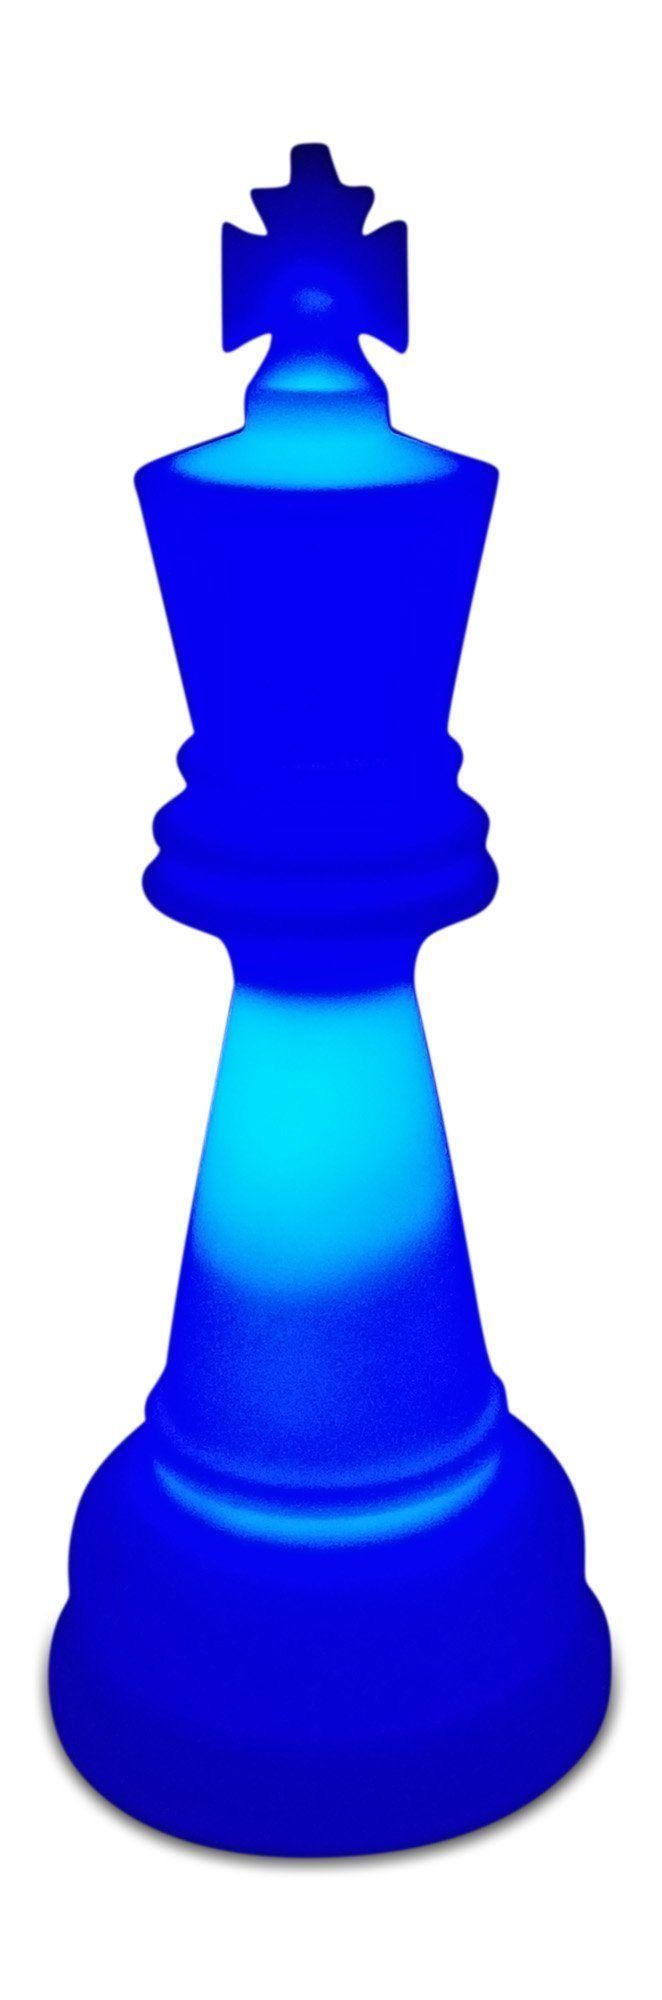 Giant Chess Piece 12 Inch Light Plastic King